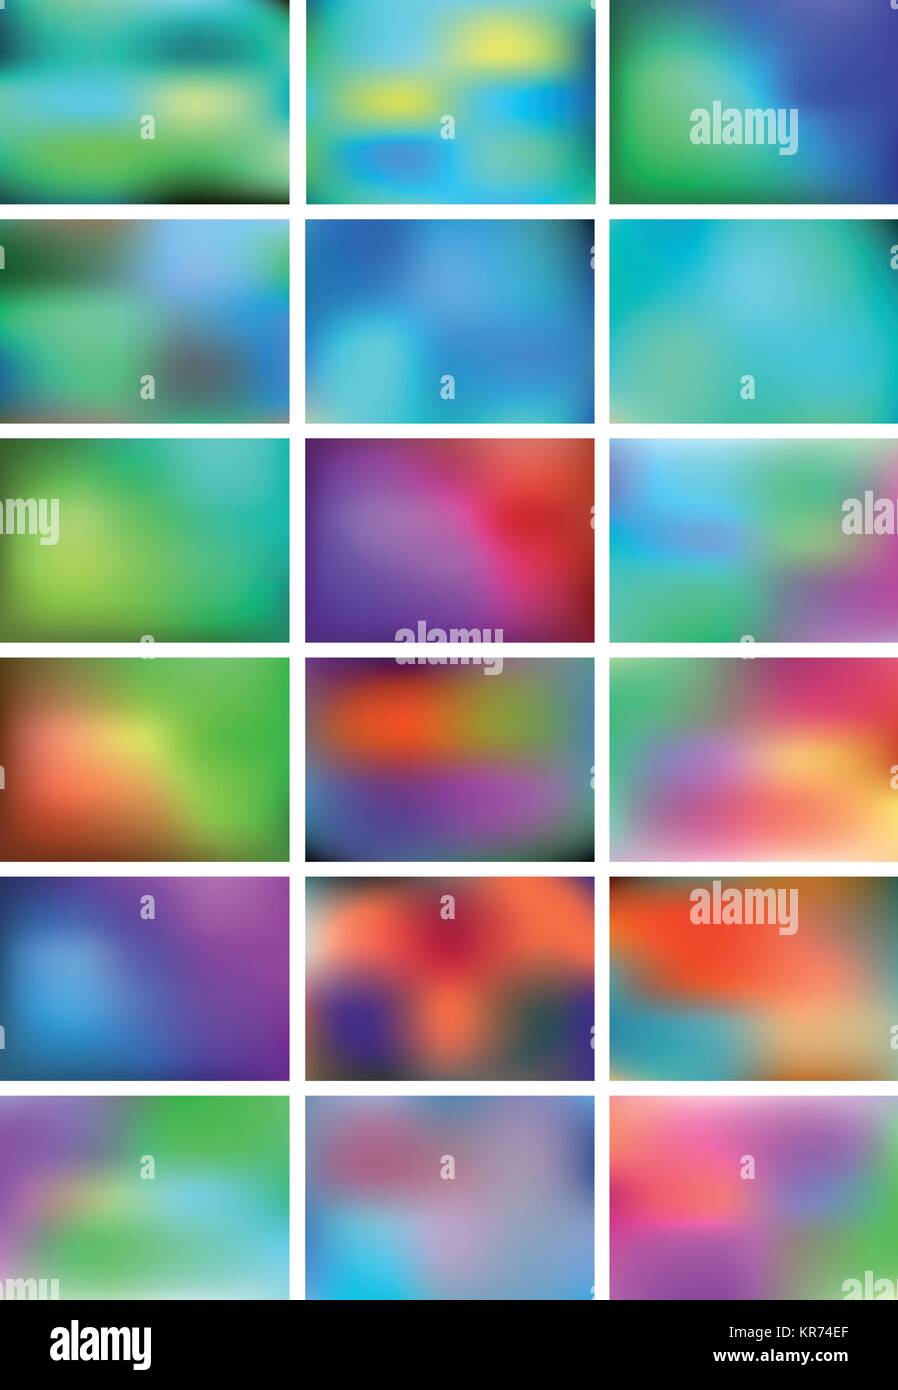 Abstract colorful gradient backgrounds, set of vector design elements Stock Vector